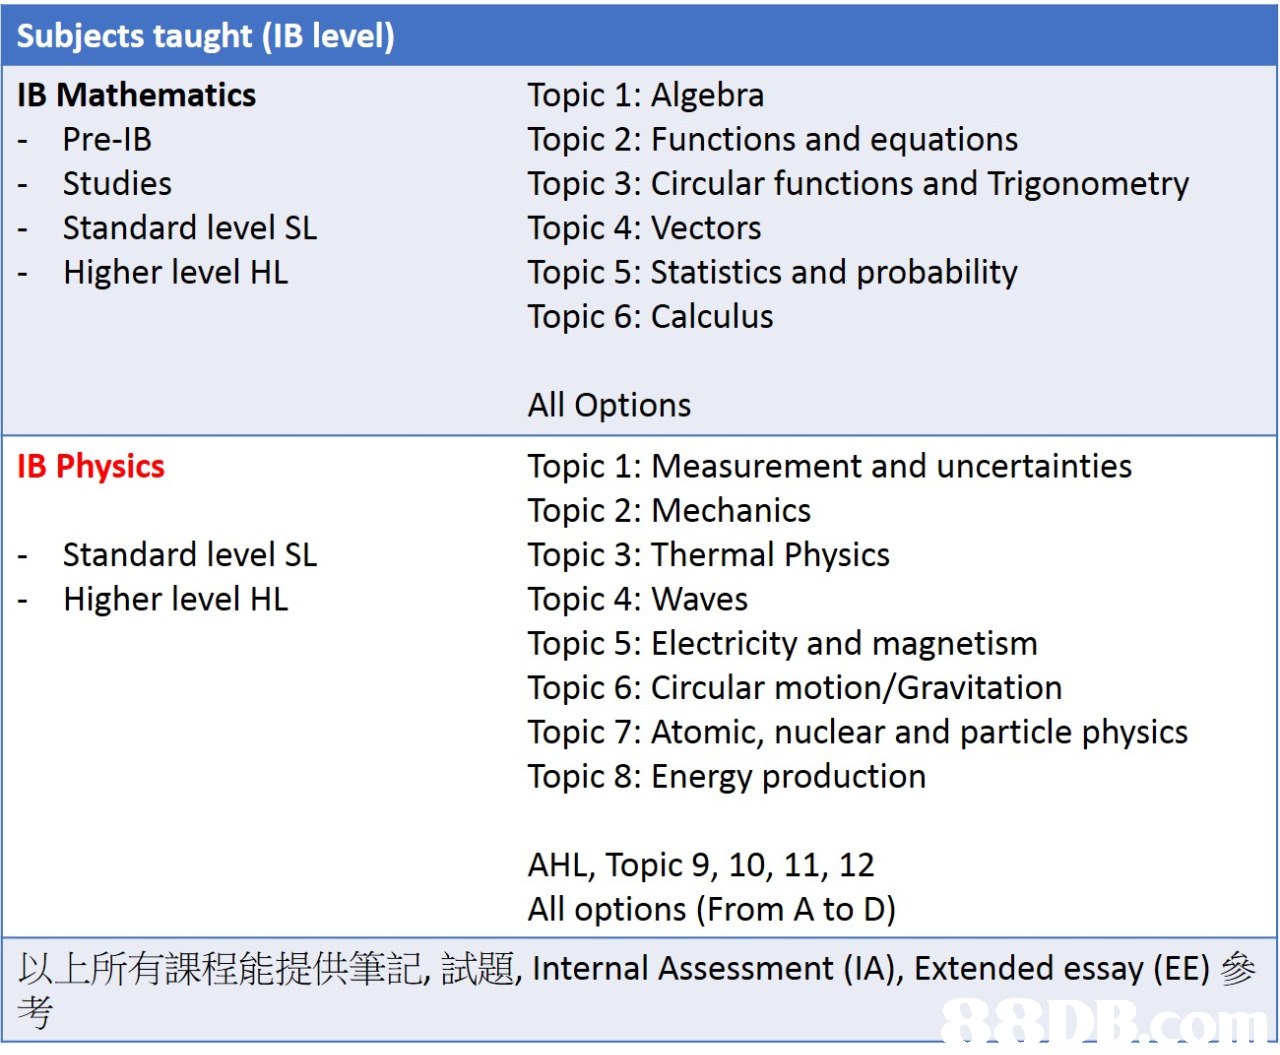 Subjects taught (IB level) IB Mathematics Pre-lB Studies Standard level SL Higher level HL Topic 1: Algebra Topic 2: Functions and equations Topic 3: Circular functions and Trigonometry Topic 4: Vectors Topic 5: Statistics and probability Topic 6: Calculus All Options Topic 1: Measurement and uncertainties Topic 2: Mechanics Topic 3: Thermal Physics Topic 4: Waves Topic 5: Electricity and magnetism Topic 6: Circular motion/Gravitation Topic 7: Atomic, nuclear and particle physics Topic 8: Energy production IB Physics Standard level SL Higher level HL AHL, Topic 9, 10, 11, 12 All options (From A to D) 以上所有課程能提供筆記試題, Internal Assessment (IA), Extended essay (EE)參 考  text,font,line,area,document